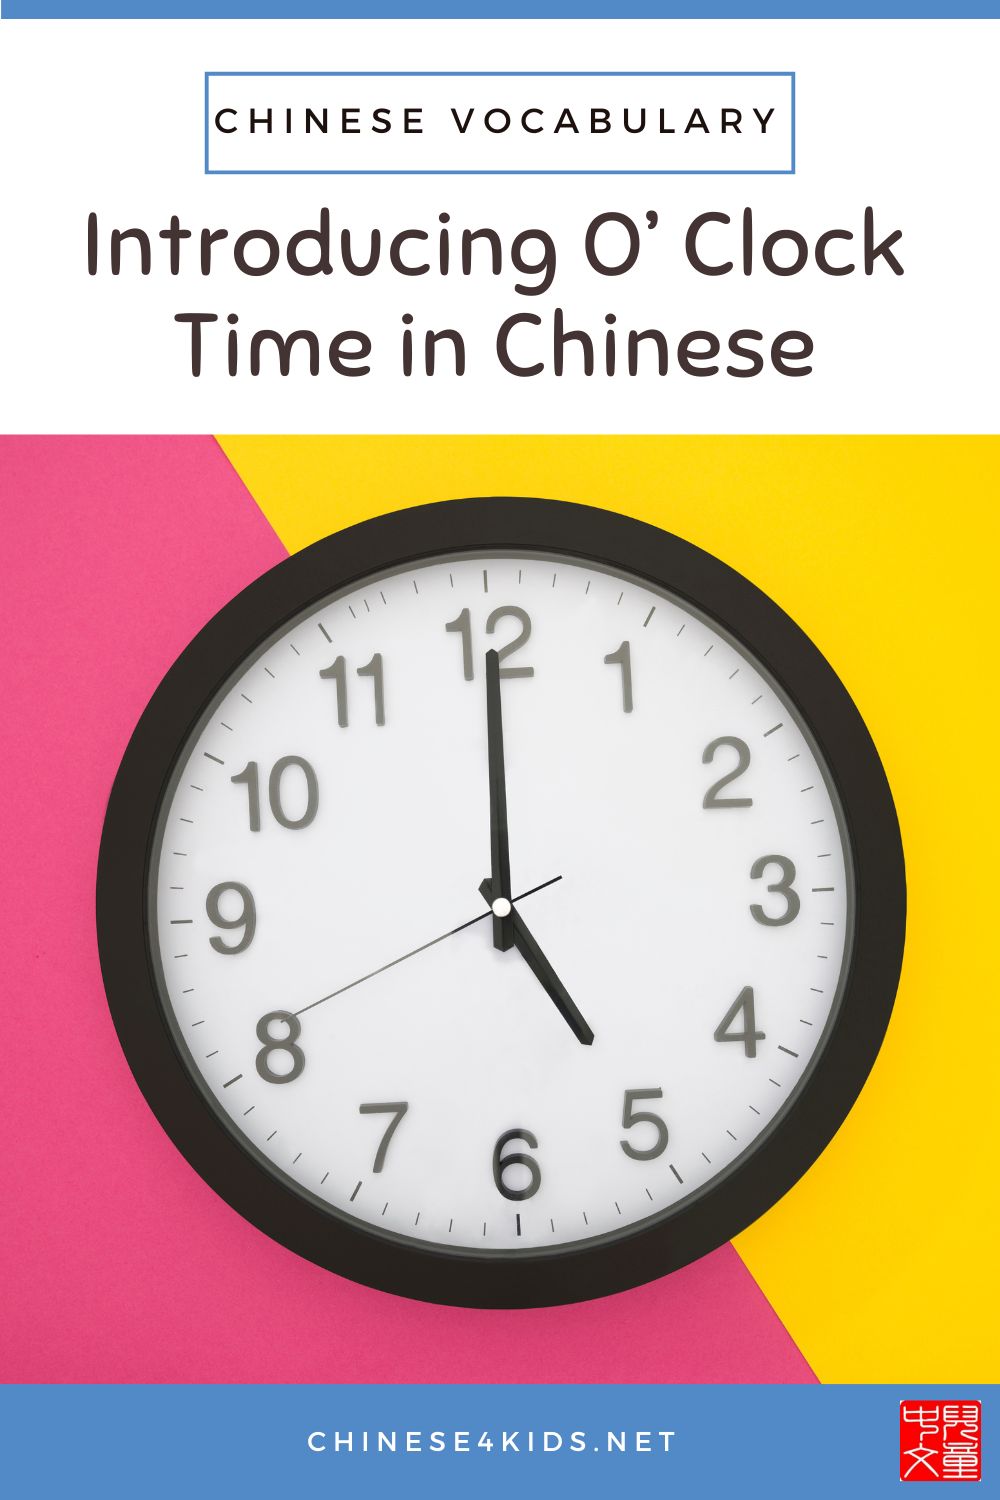 introducing o'clock time vocabulary in Chinese - learn about o'clock time words in Chinese